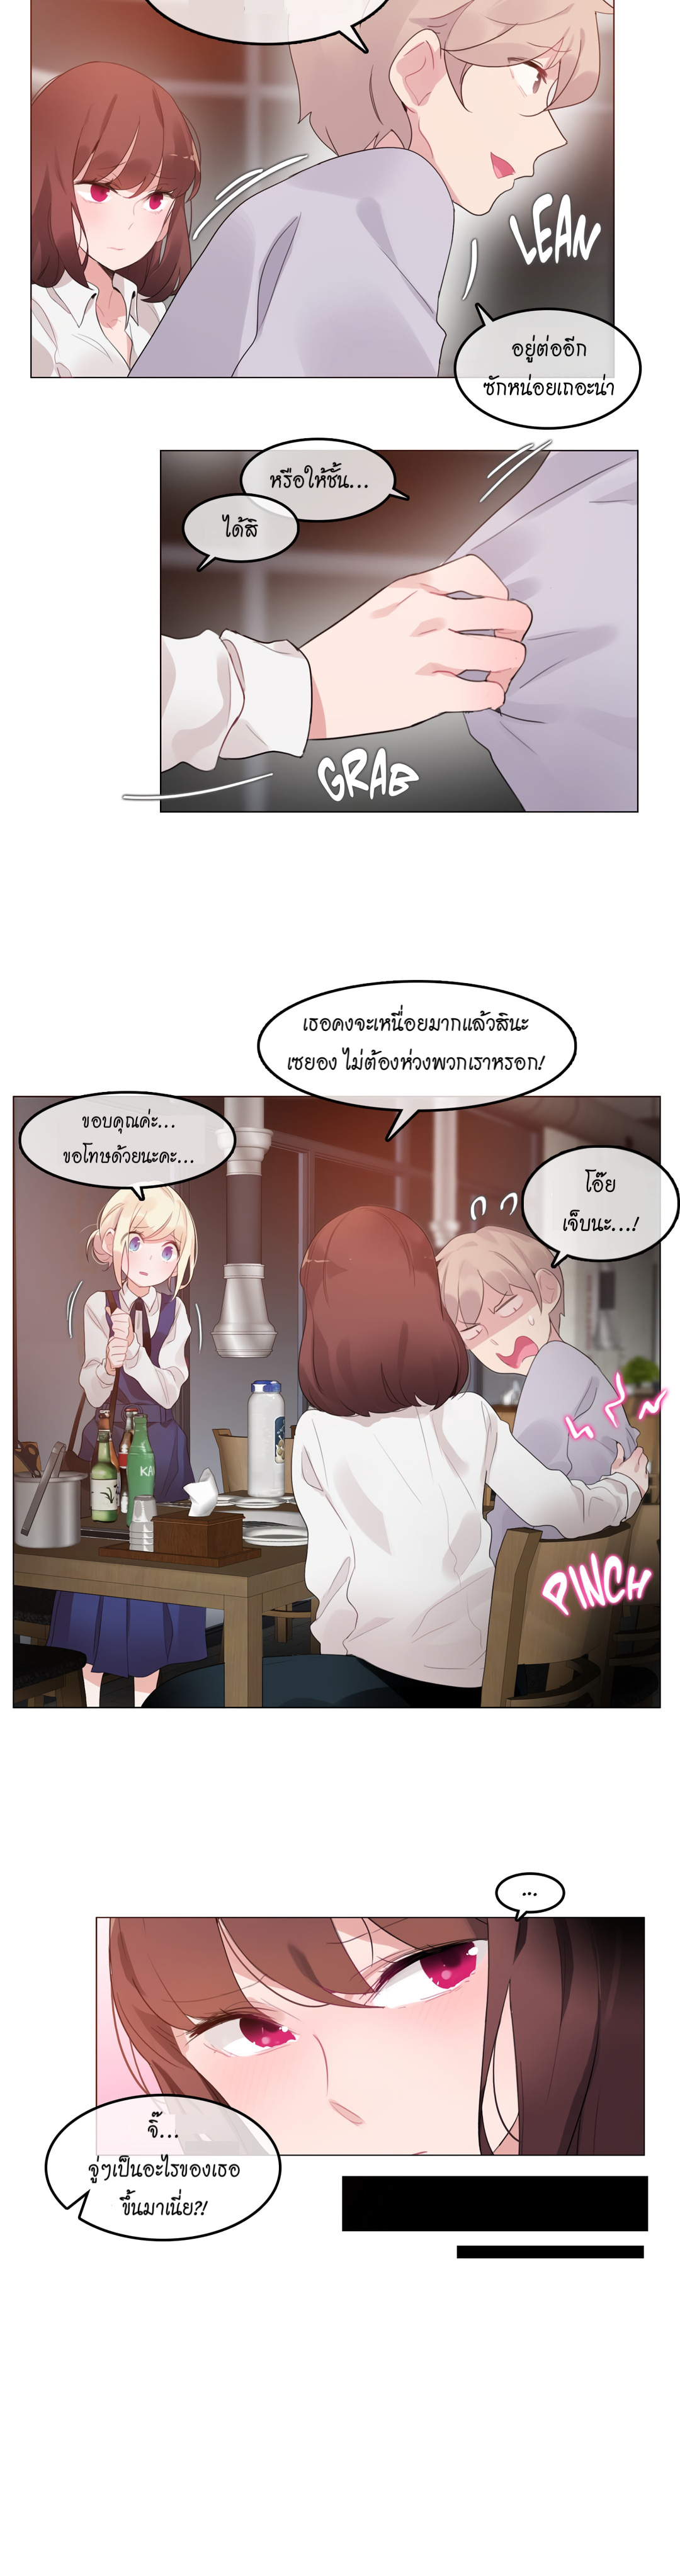 A Pervert’s Daily Life55 (8)